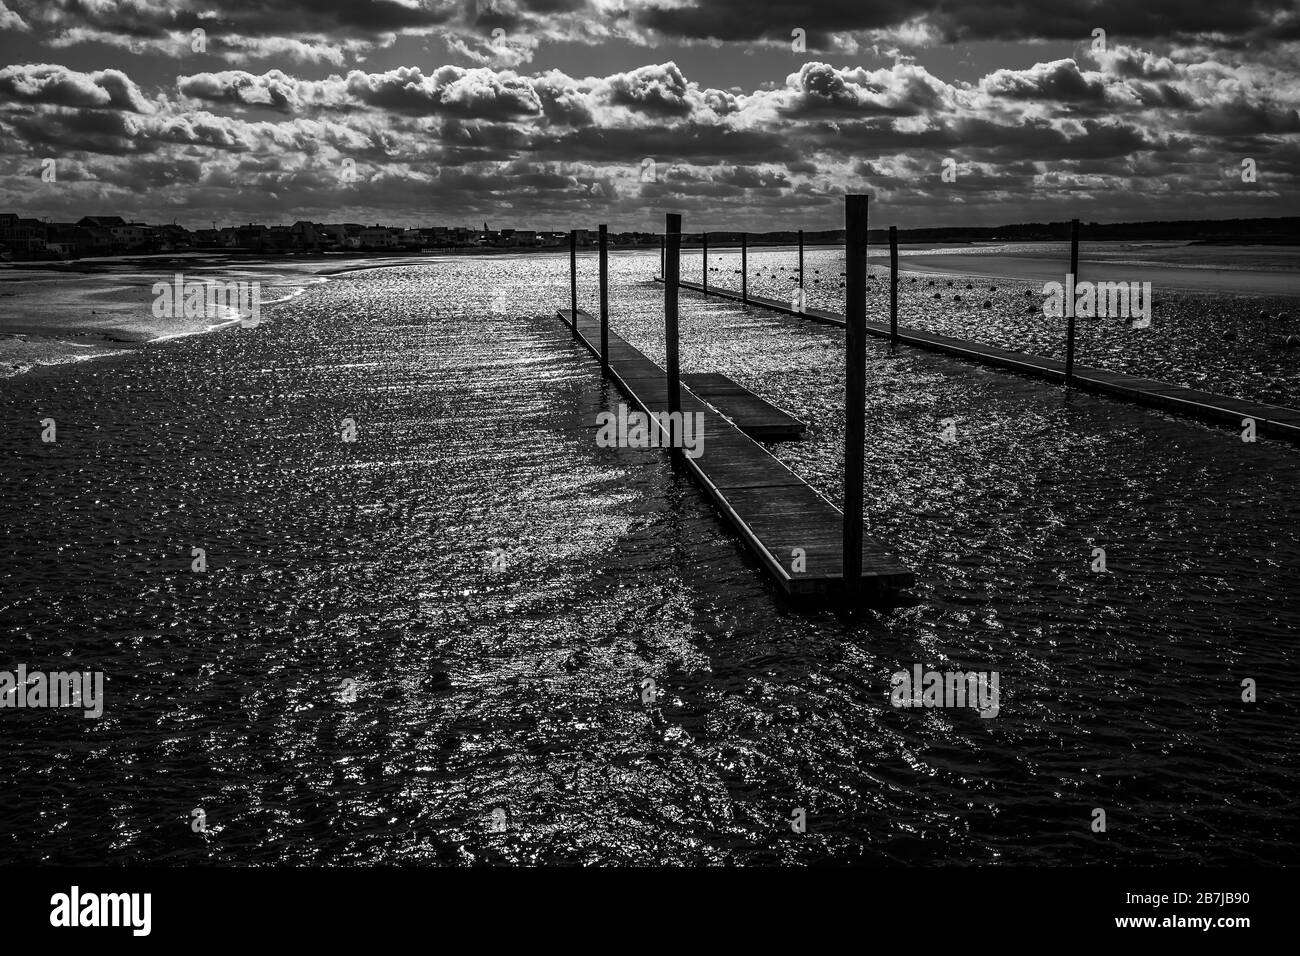 These empty docks, and moorings, take on a lonesome look as the wind blows across the harbor water on this very cold lonely cloudy winter morning.. Stock Photo